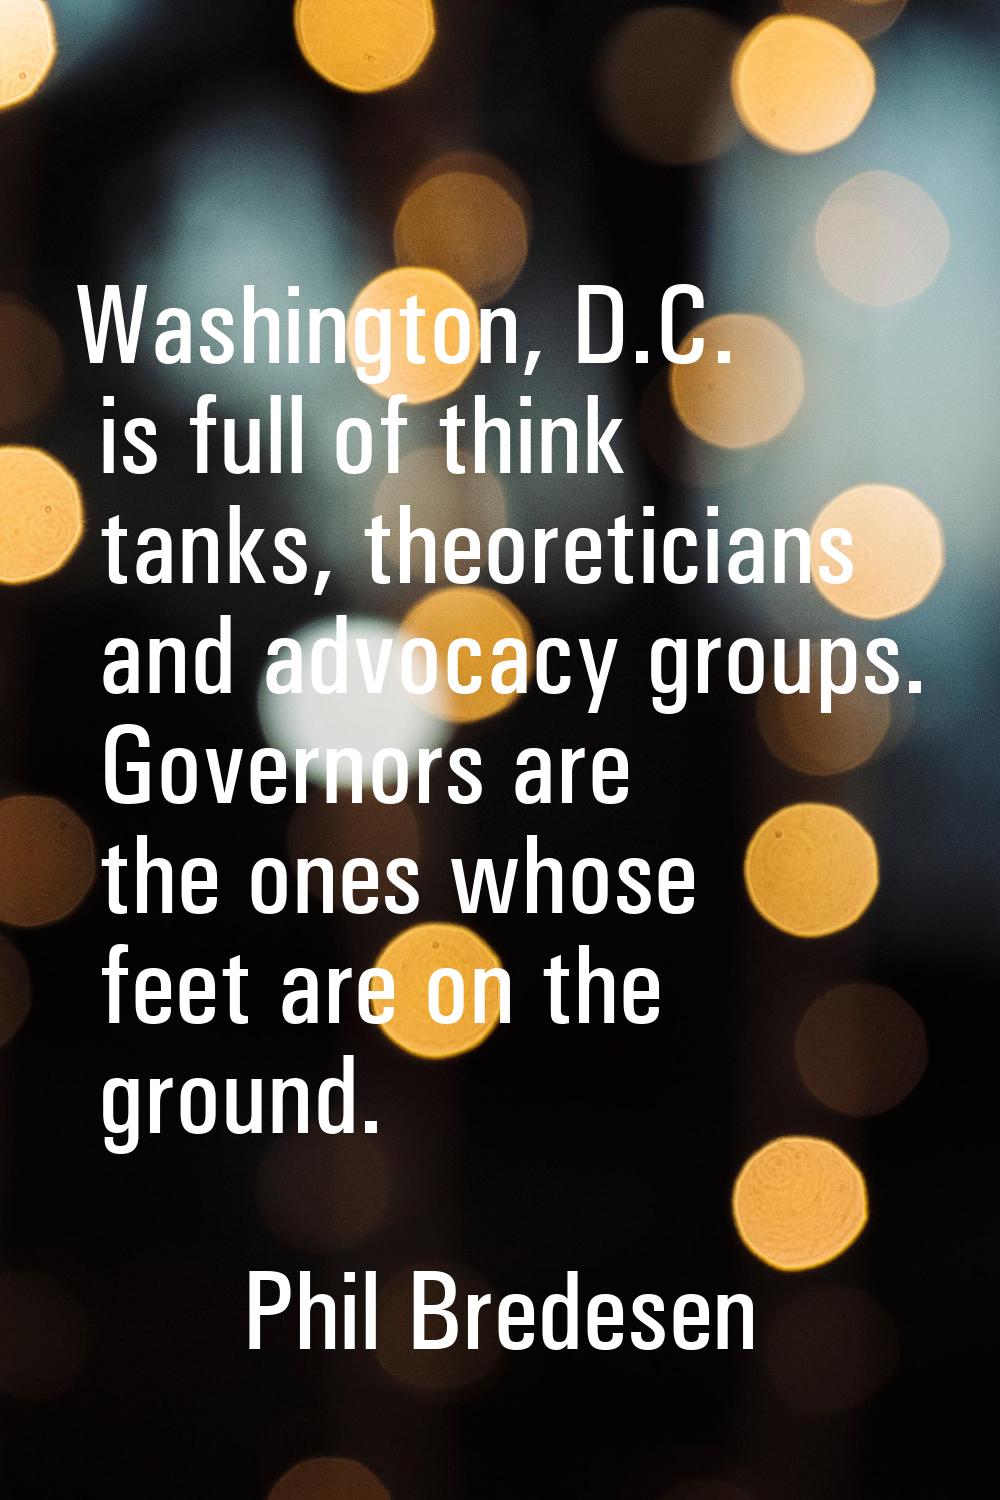 Washington, D.C. is full of think tanks, theoreticians and advocacy groups. Governors are the ones 